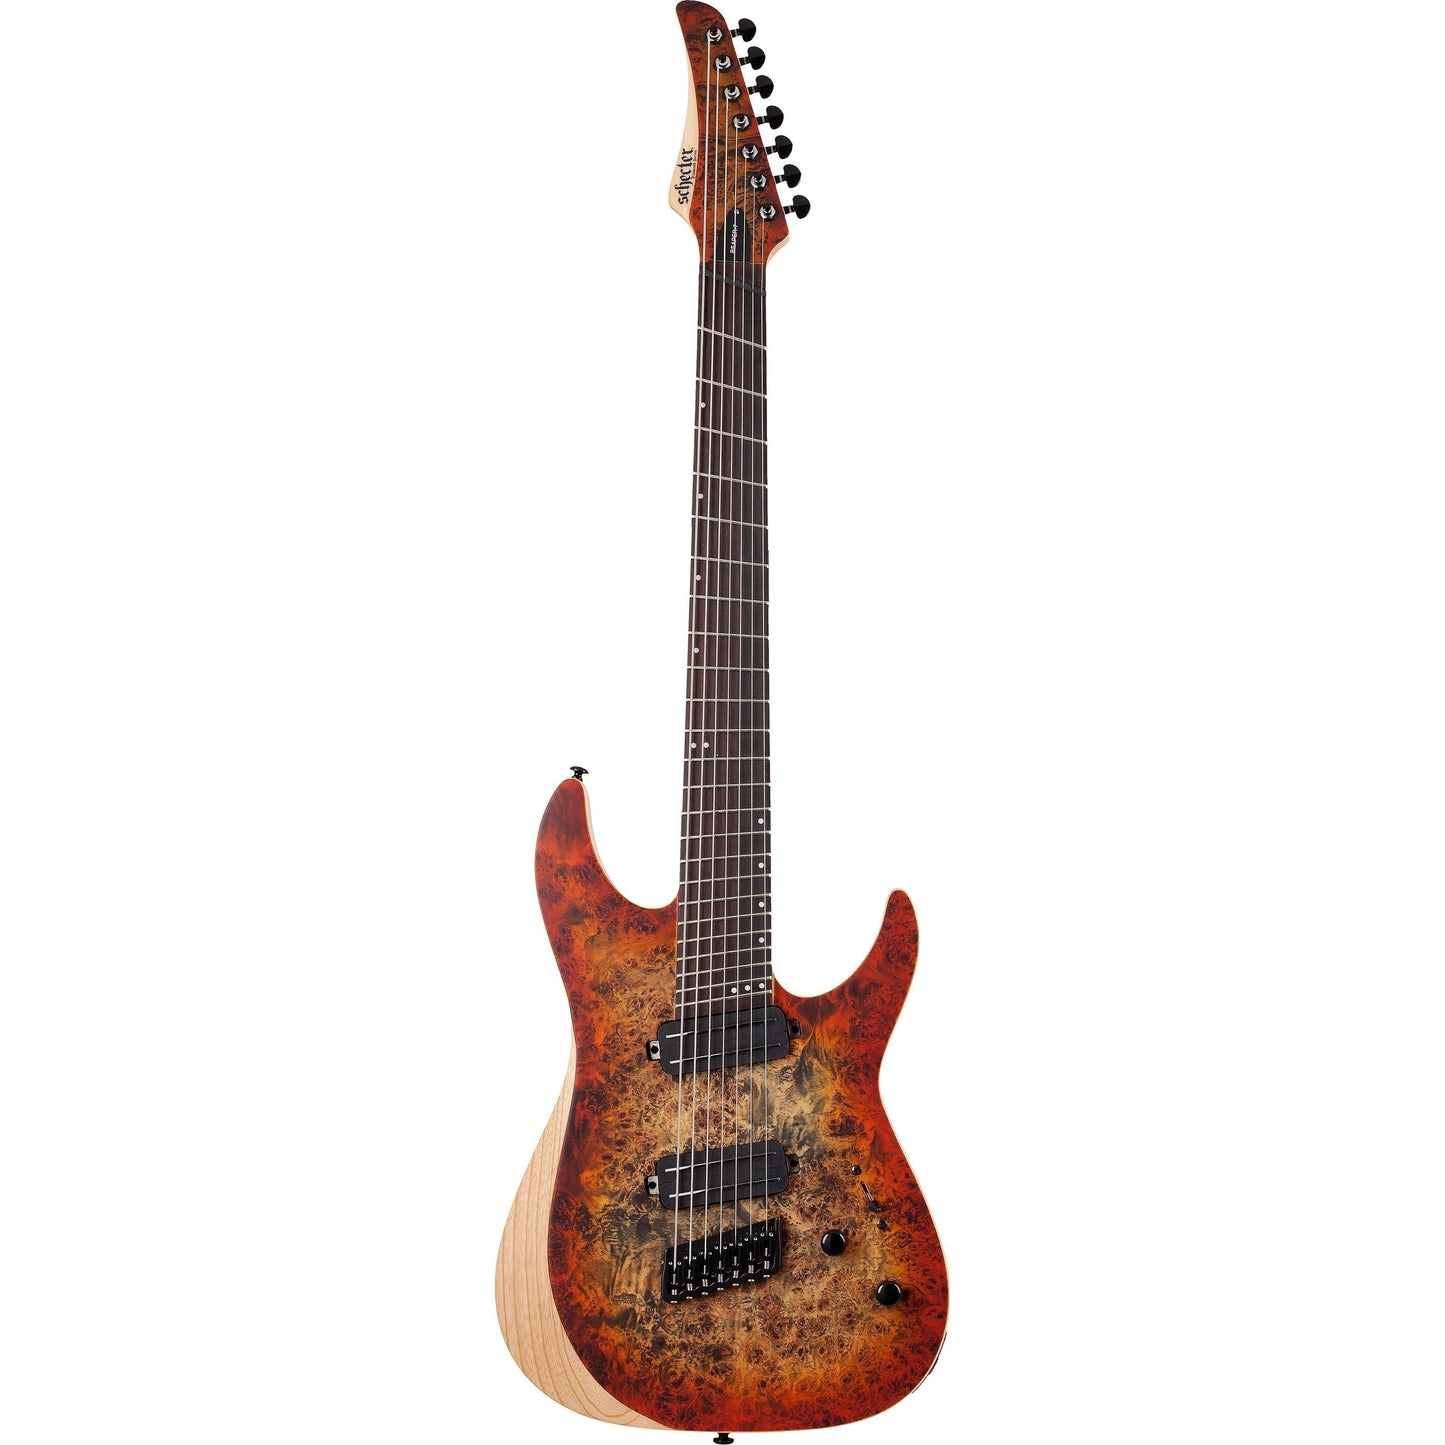 Schecter Reaper 7MS Electric Guitar, 7-String, Inferno Burst